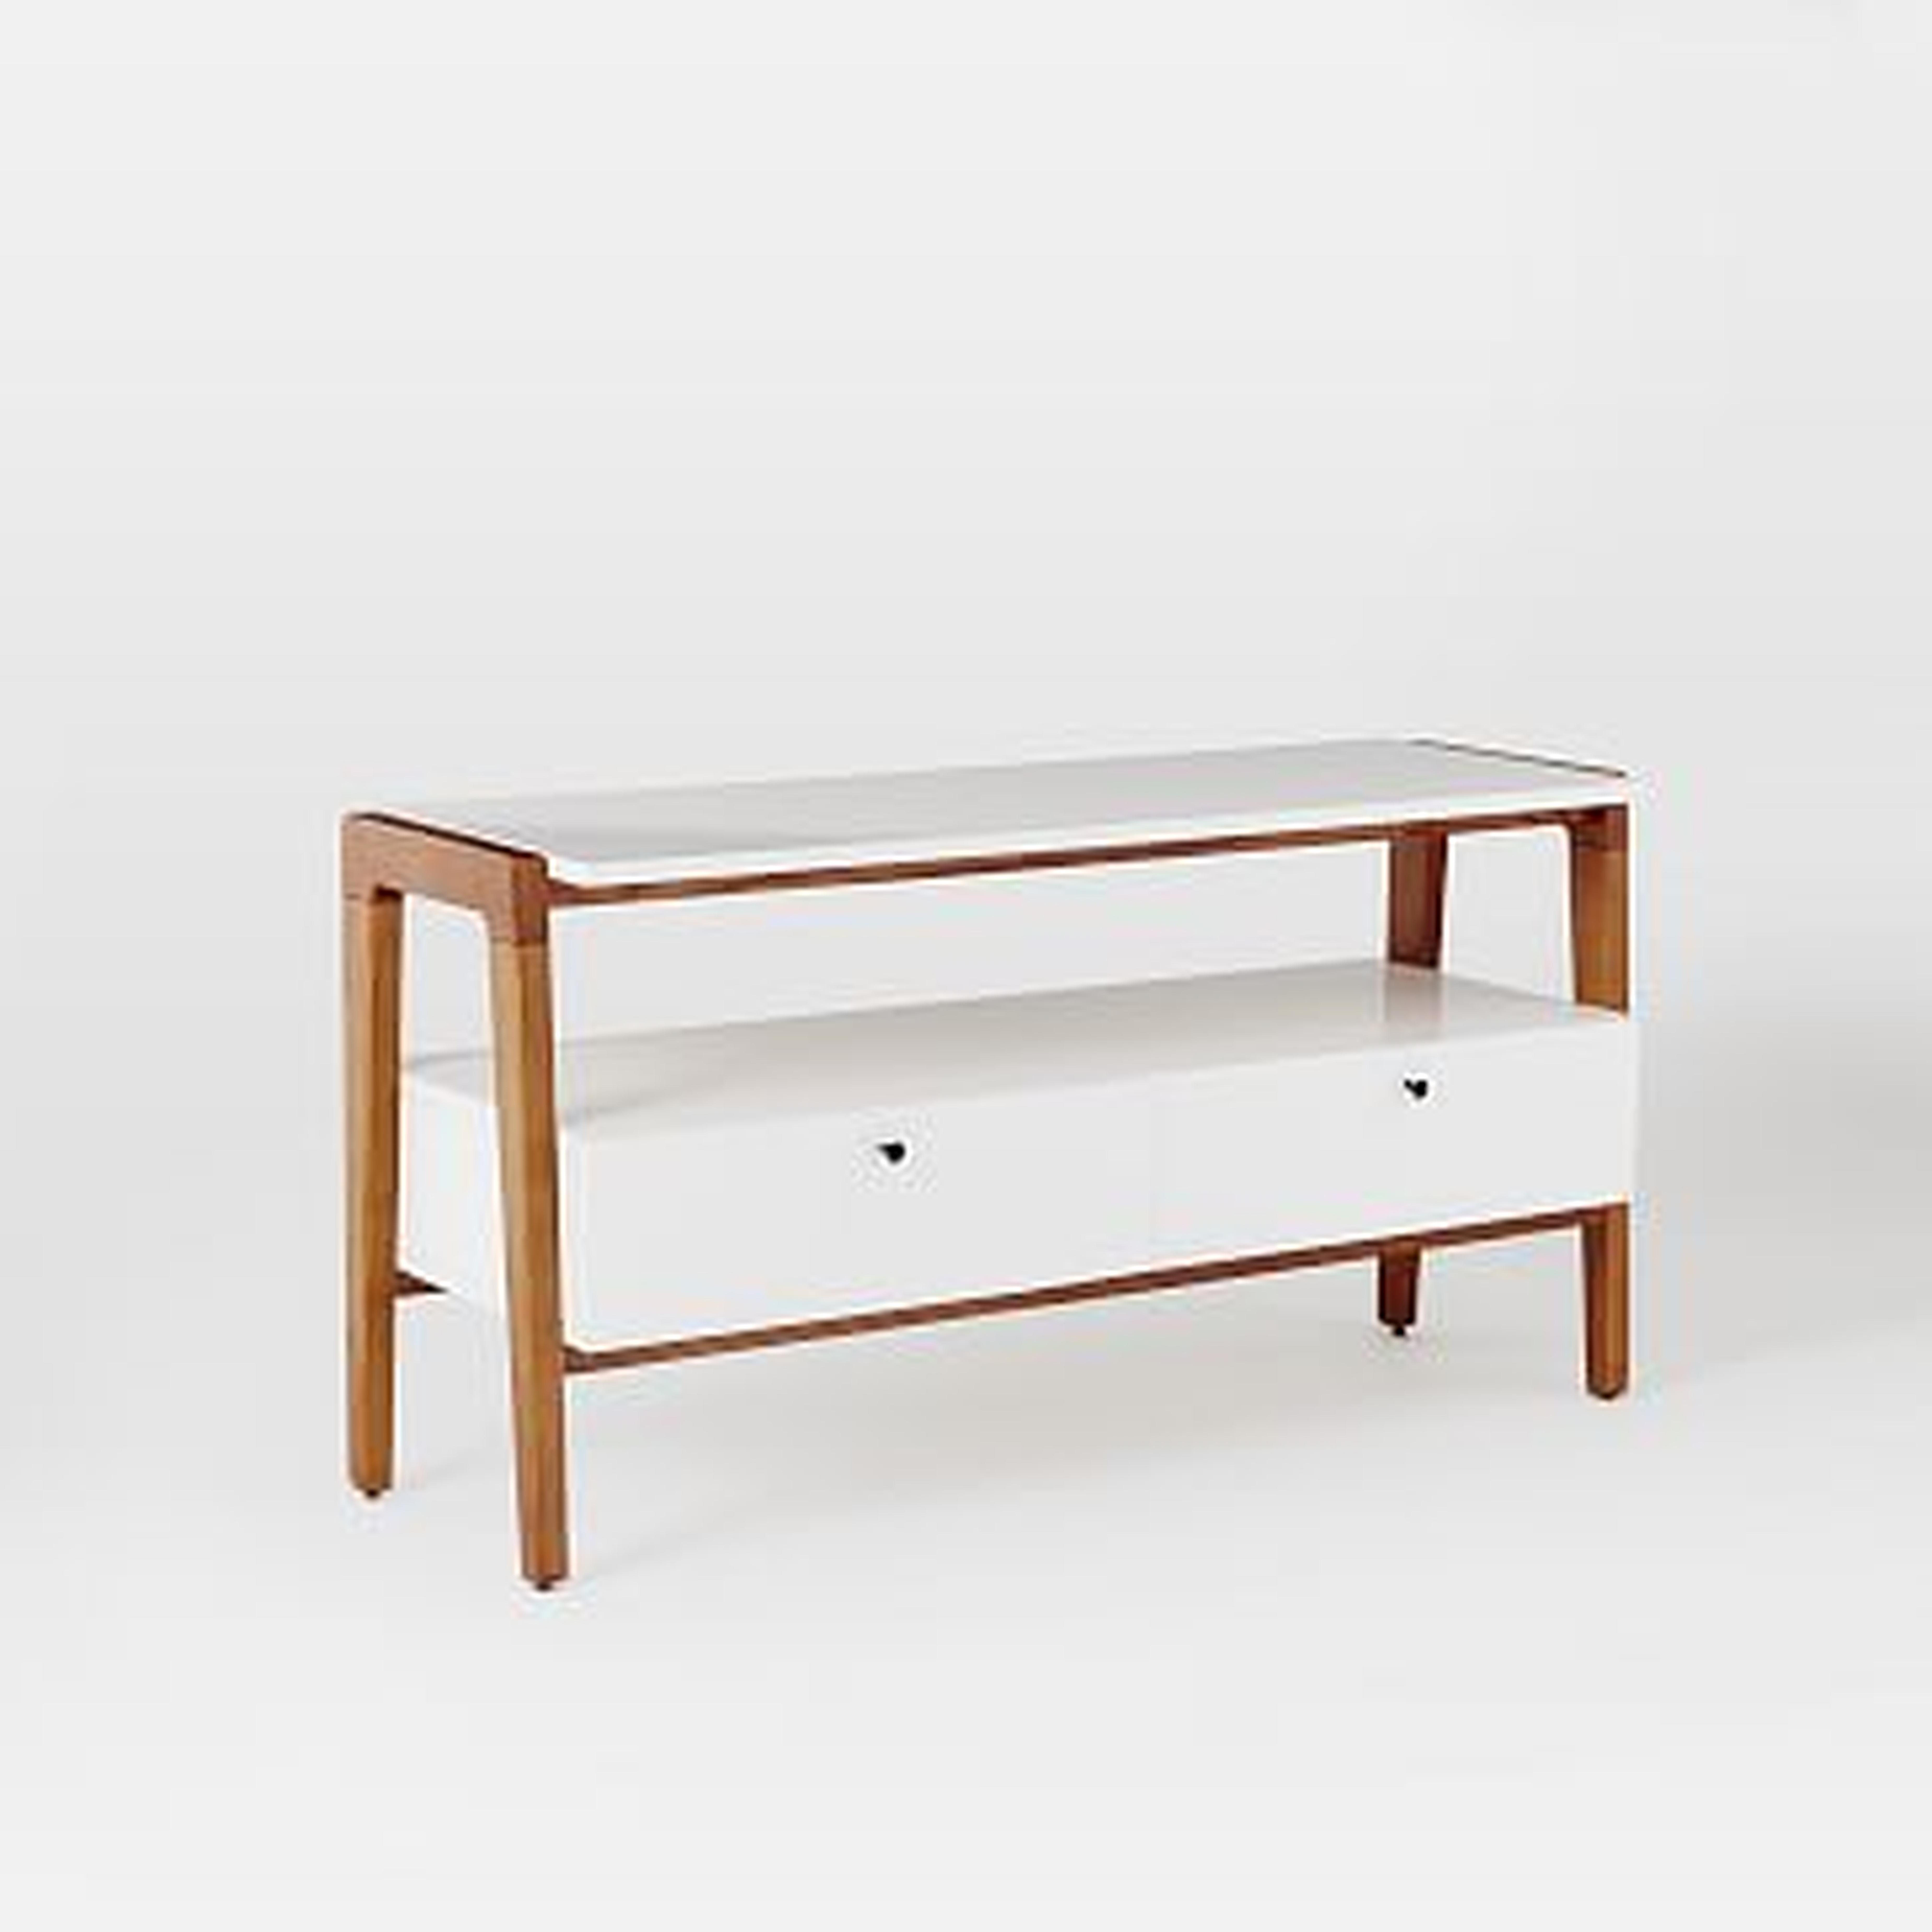 Modern Media Console- Small, Pecan/White - West Elm